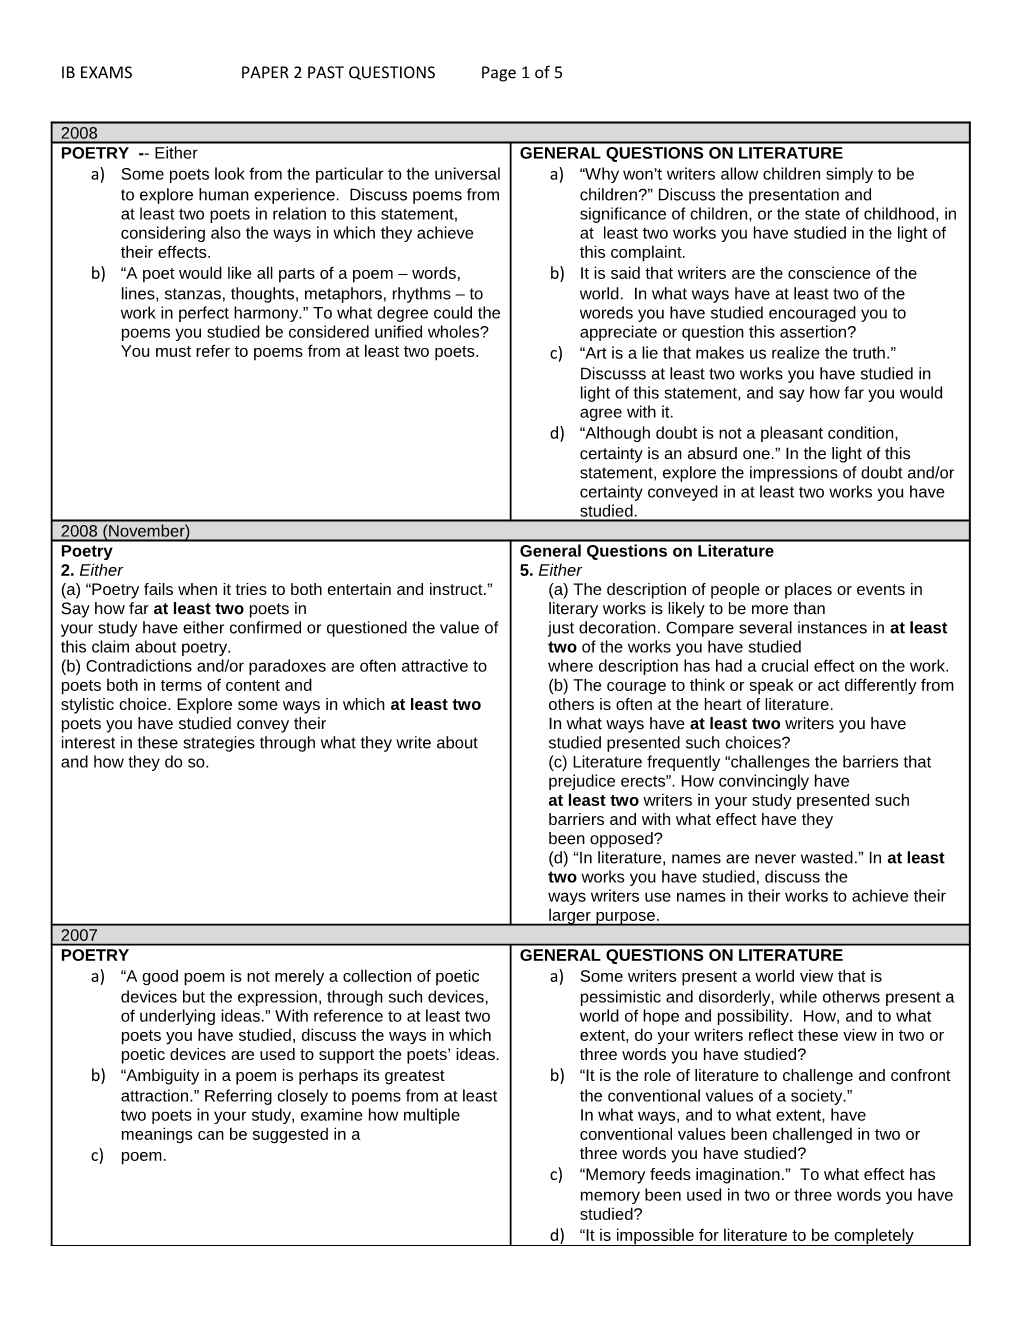 IB EXAMSPAPER 2 PAST Questionspage 1 of 5